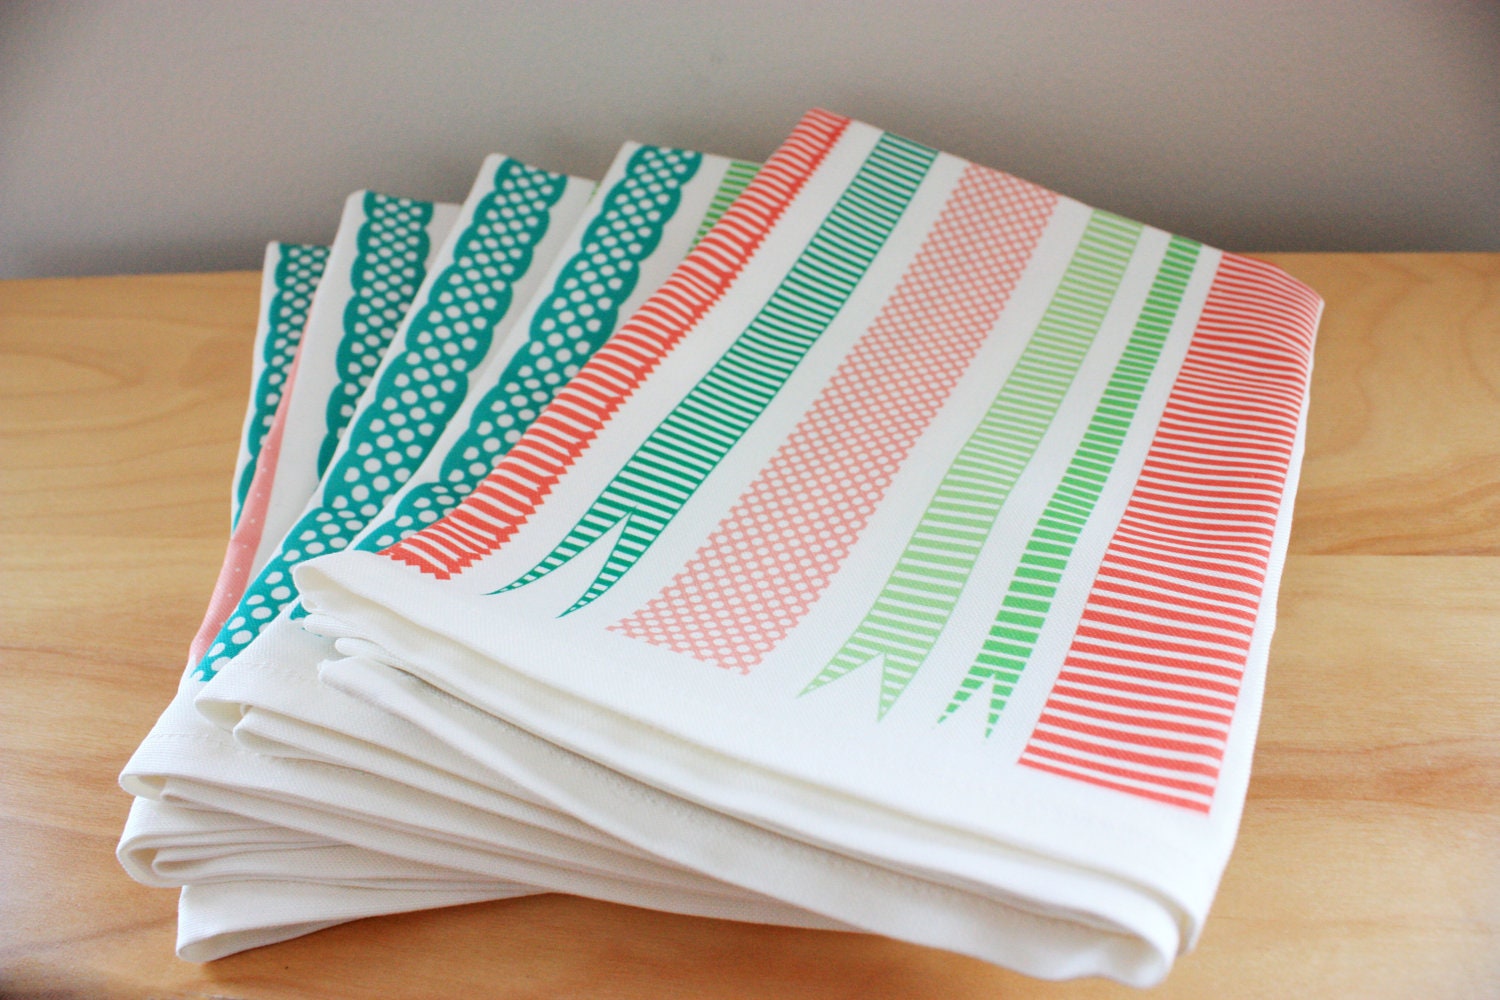 Christmas Tea Towel in Pink, Red and Green - Linen Cotton blend Tea Towel 18 x 24 inch - wickedmint